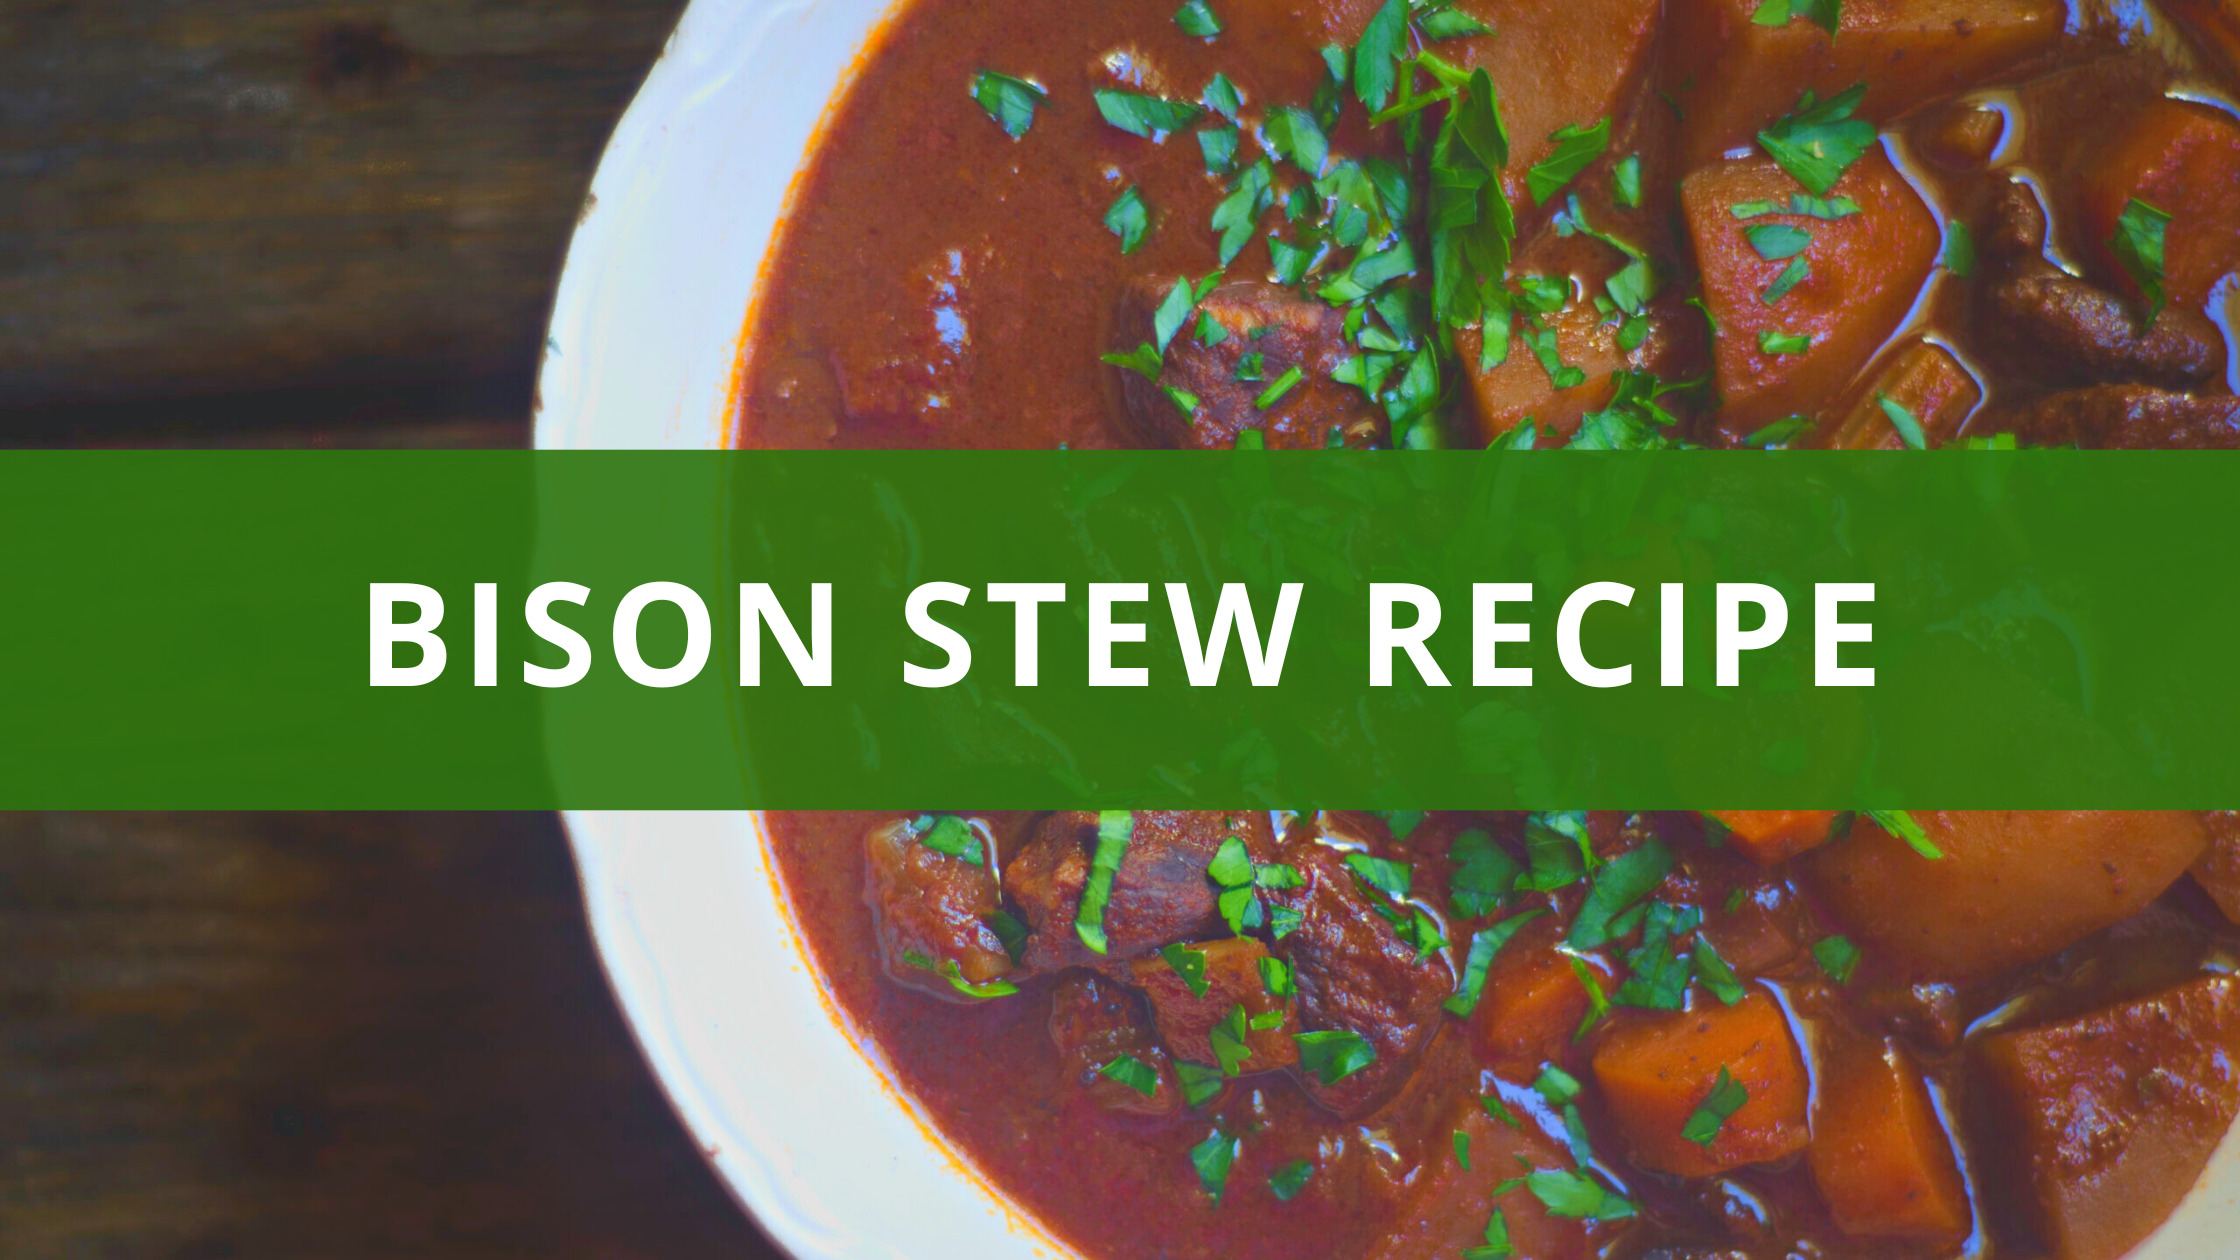 Traditional Bison Stew Recipe